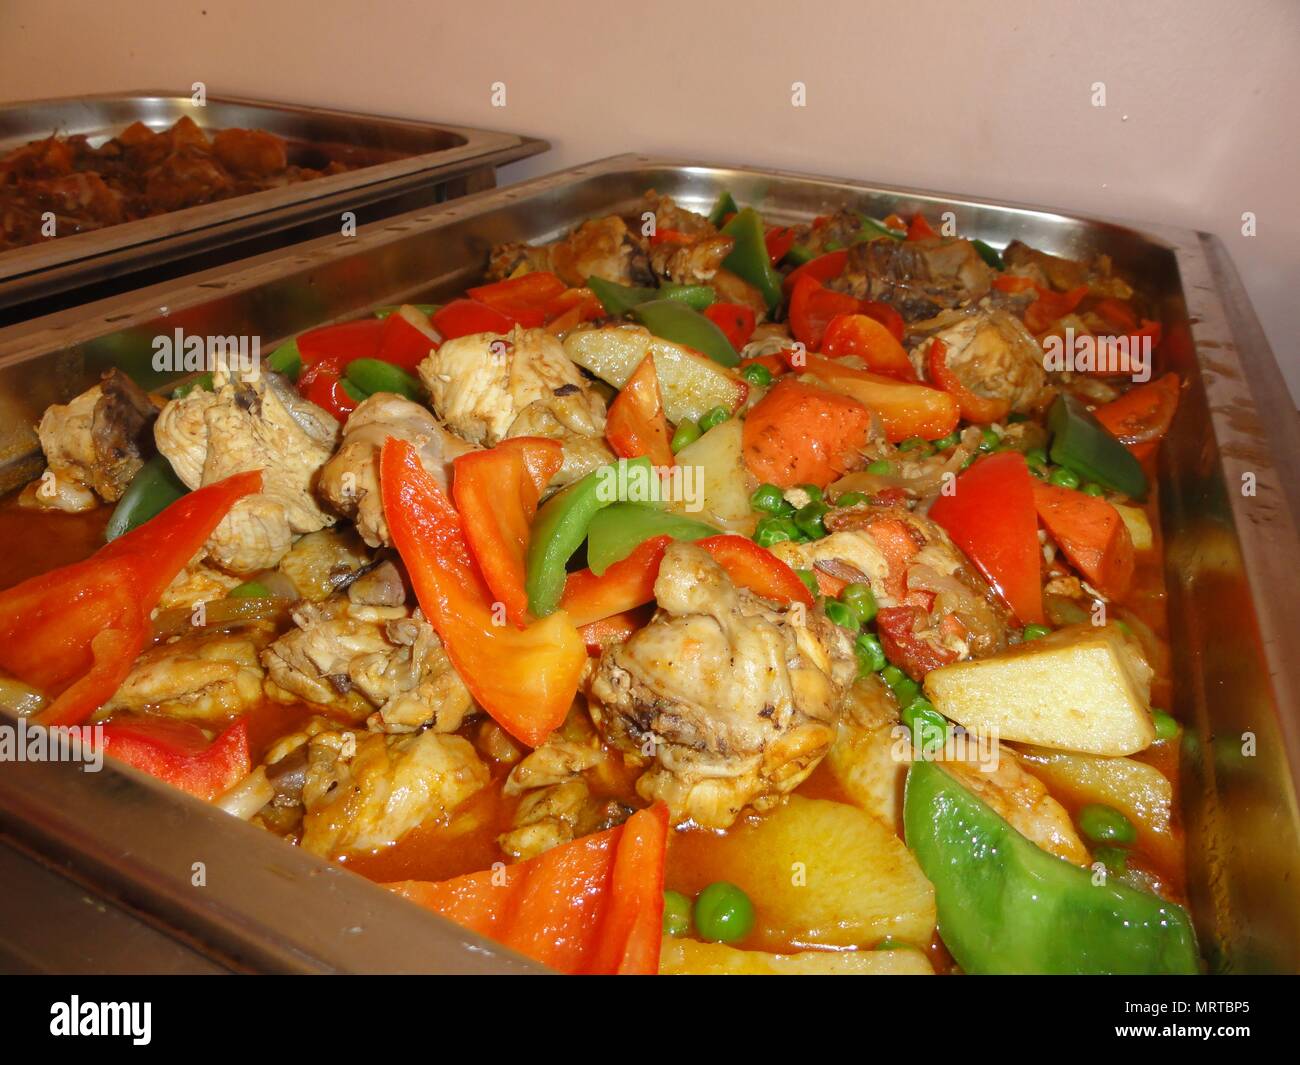 Chicken afritada is a popular favorite dish in the Philippines where chicken pieces are cooked in tomato sauce with potatoes, carrots, bell peppers, a Stock Photo